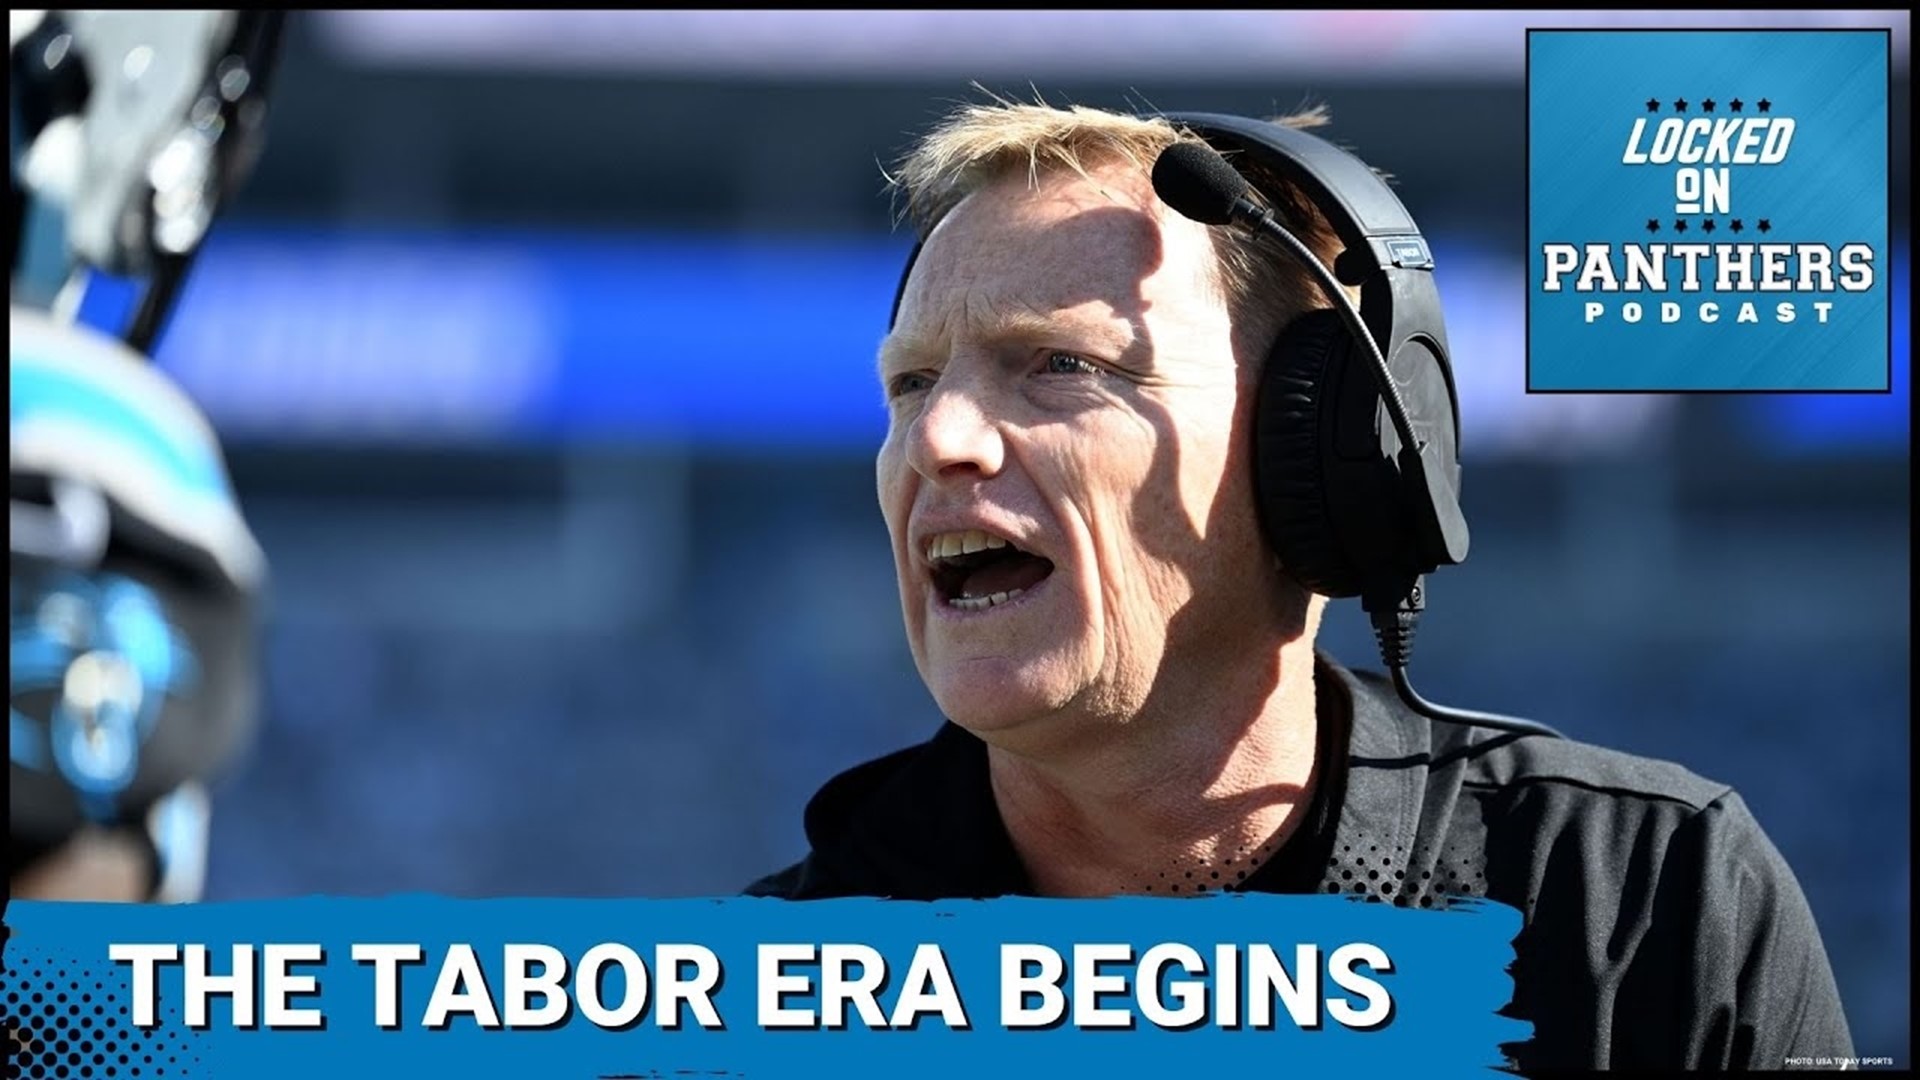 The Chris Tabor era has arrived. The Carolina Panthers transition from fired head coach Frank Reich to interim head coach Chris Tabor.